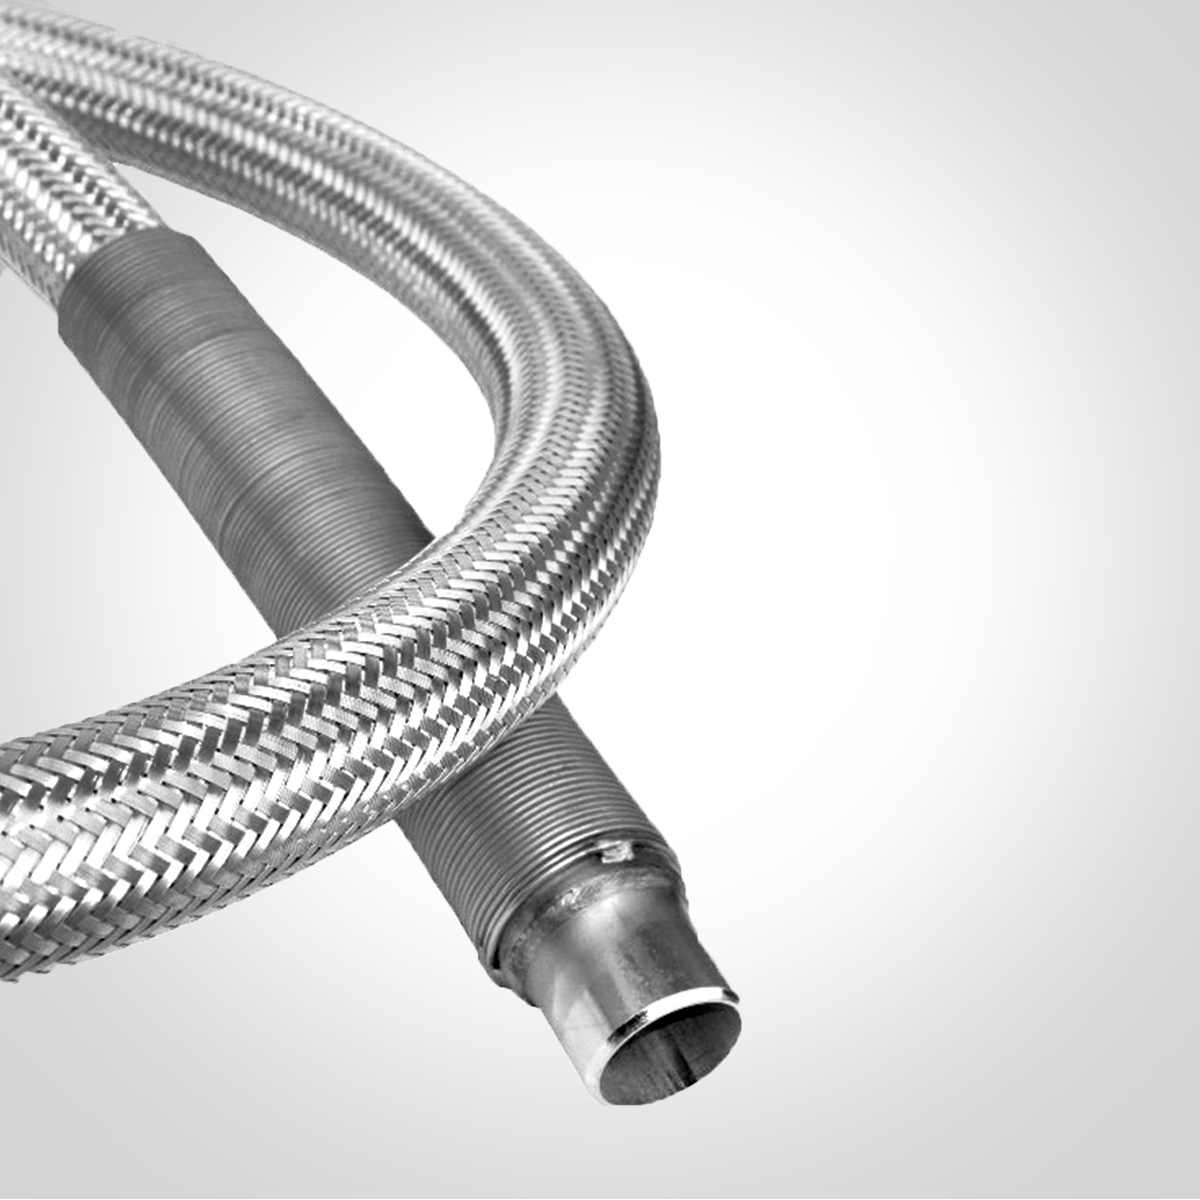 More Industrial metal hoses for liquids and gases